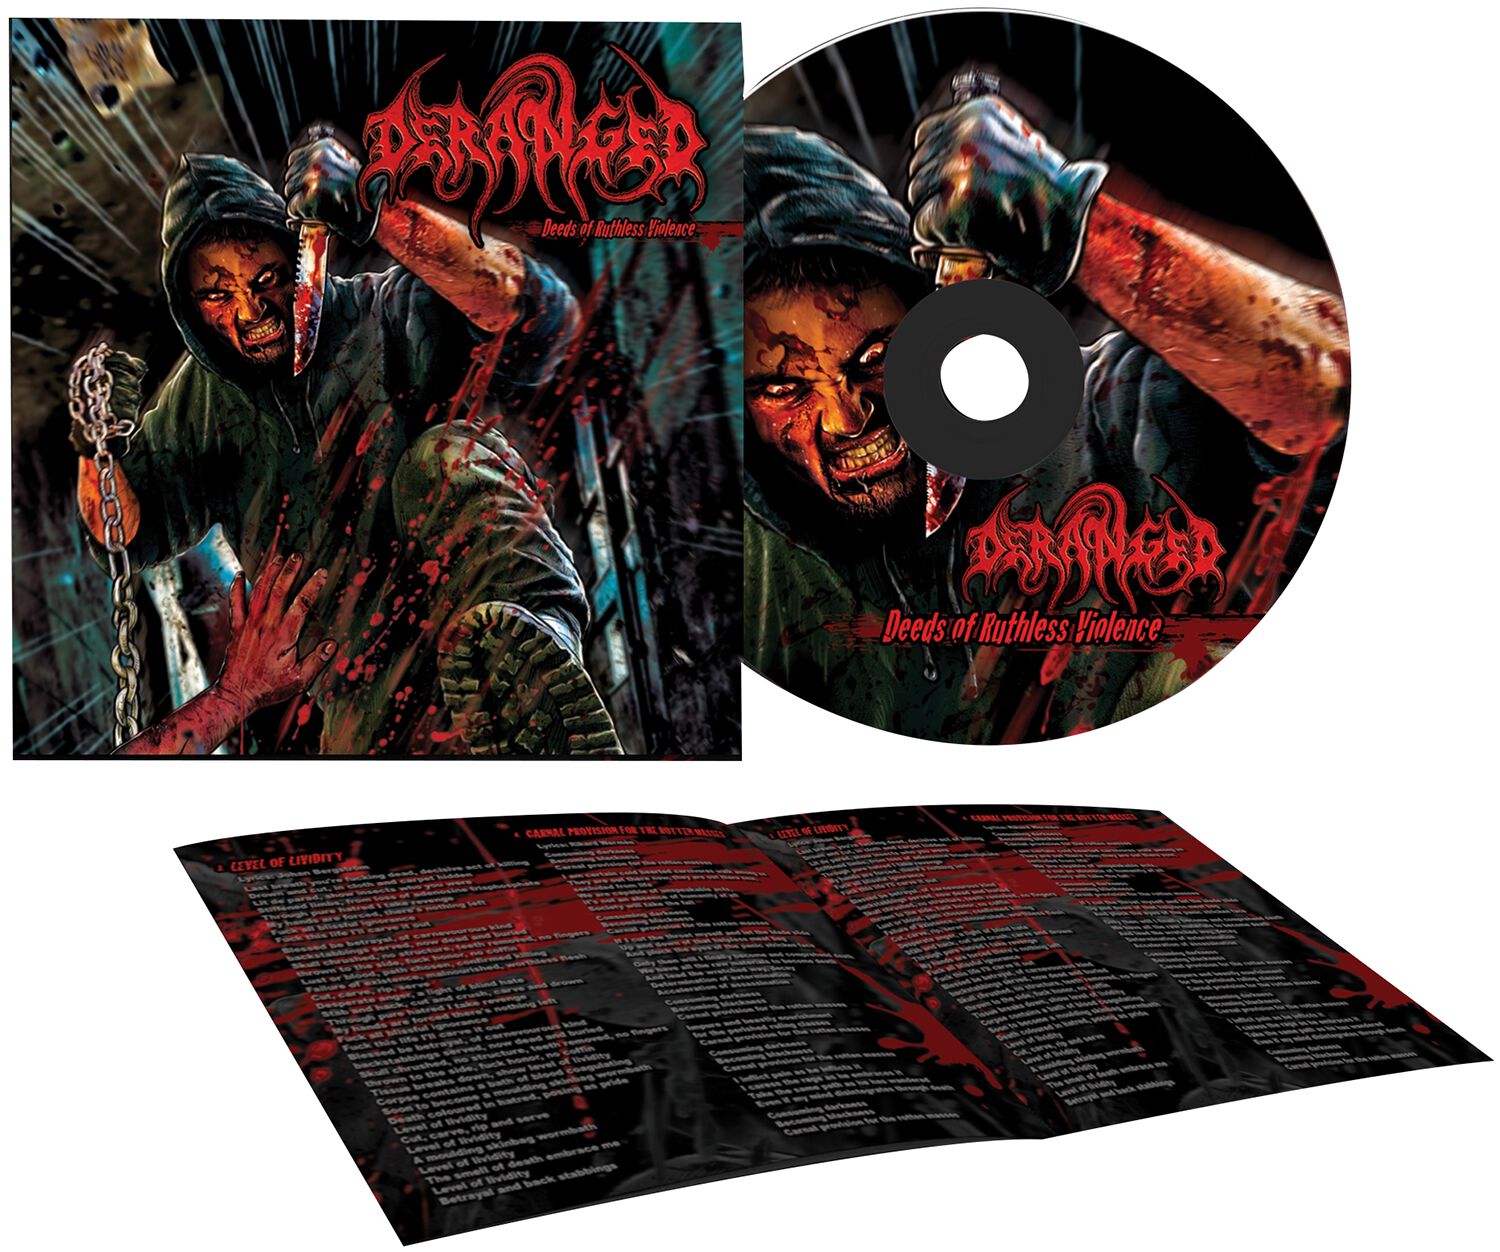 Deranged Deeds of ruthless violence CD multicolor